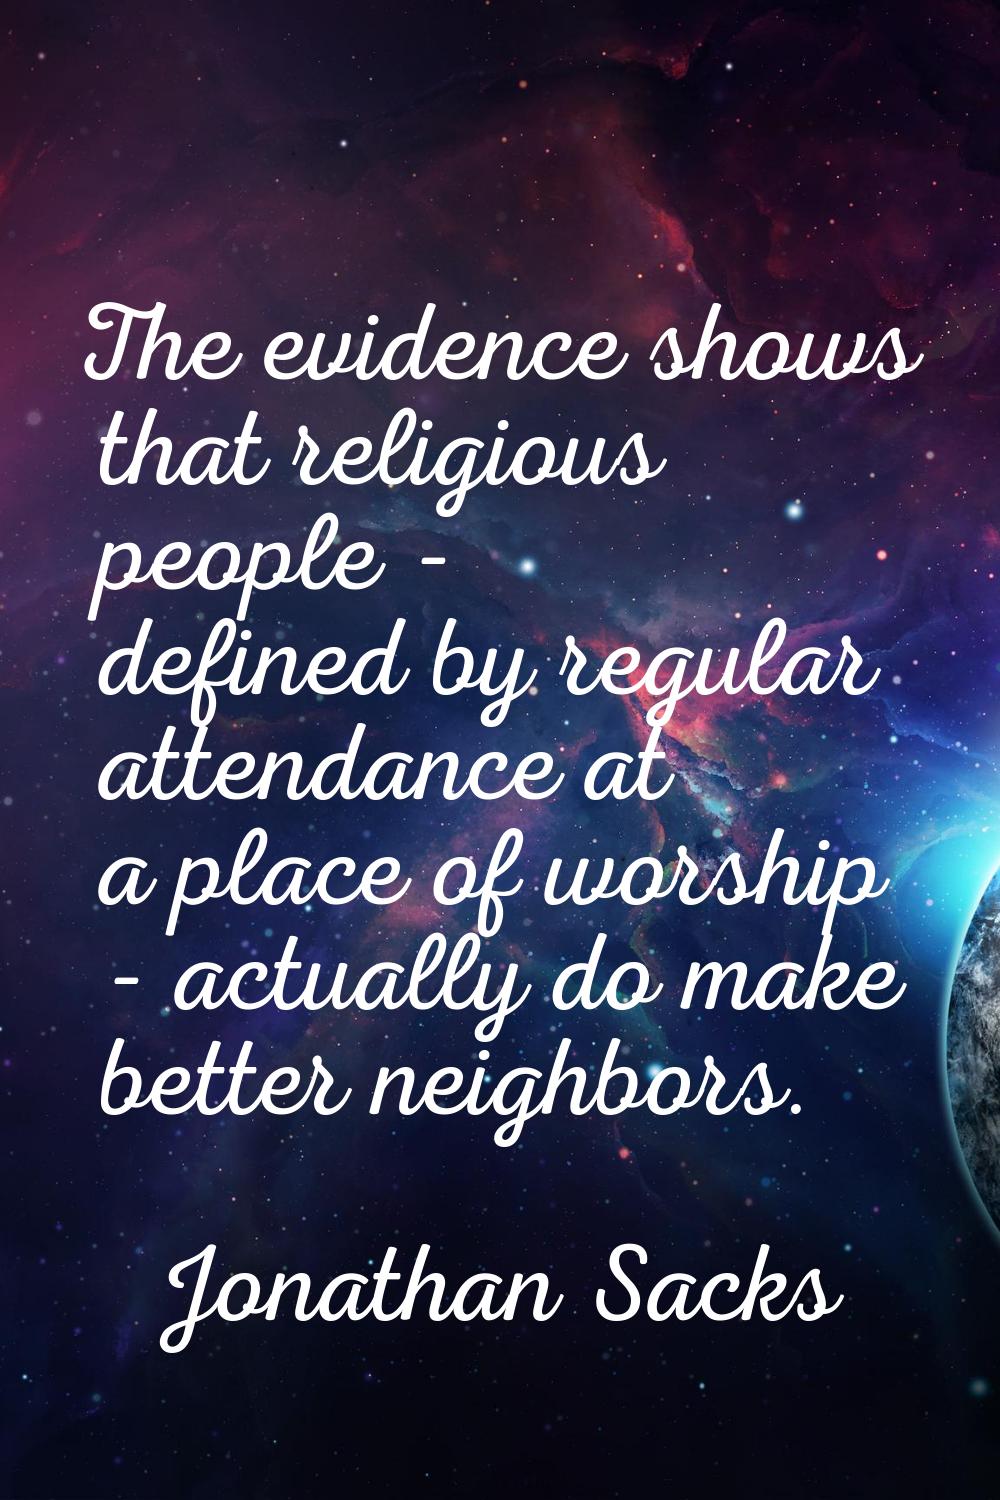 The evidence shows that religious people - defined by regular attendance at a place of worship - ac